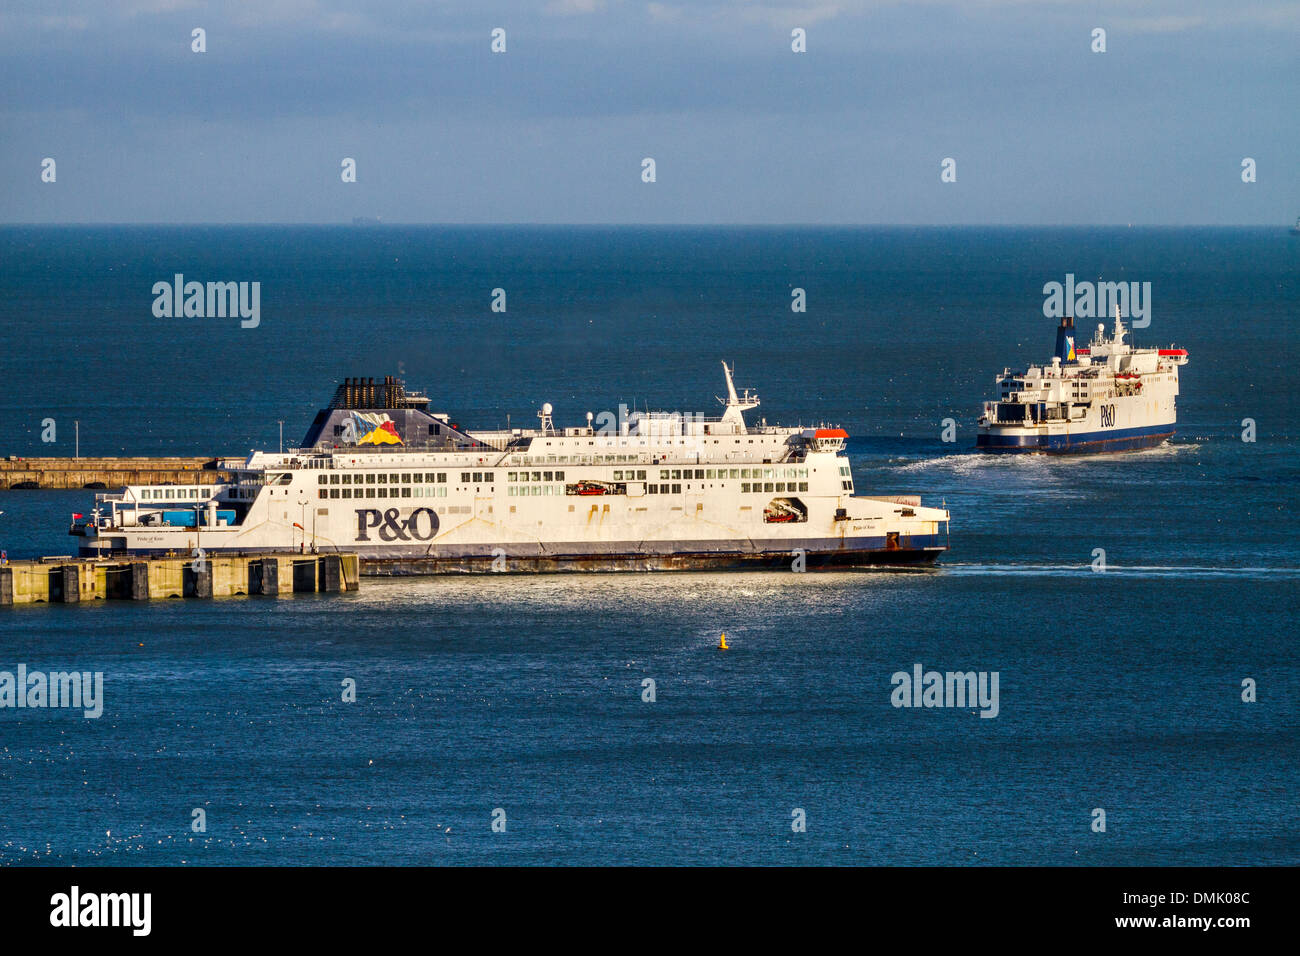 P&O ferry boats maneuver at the Port of Dover Ferry Terminal, Kent, UK Stock Photo